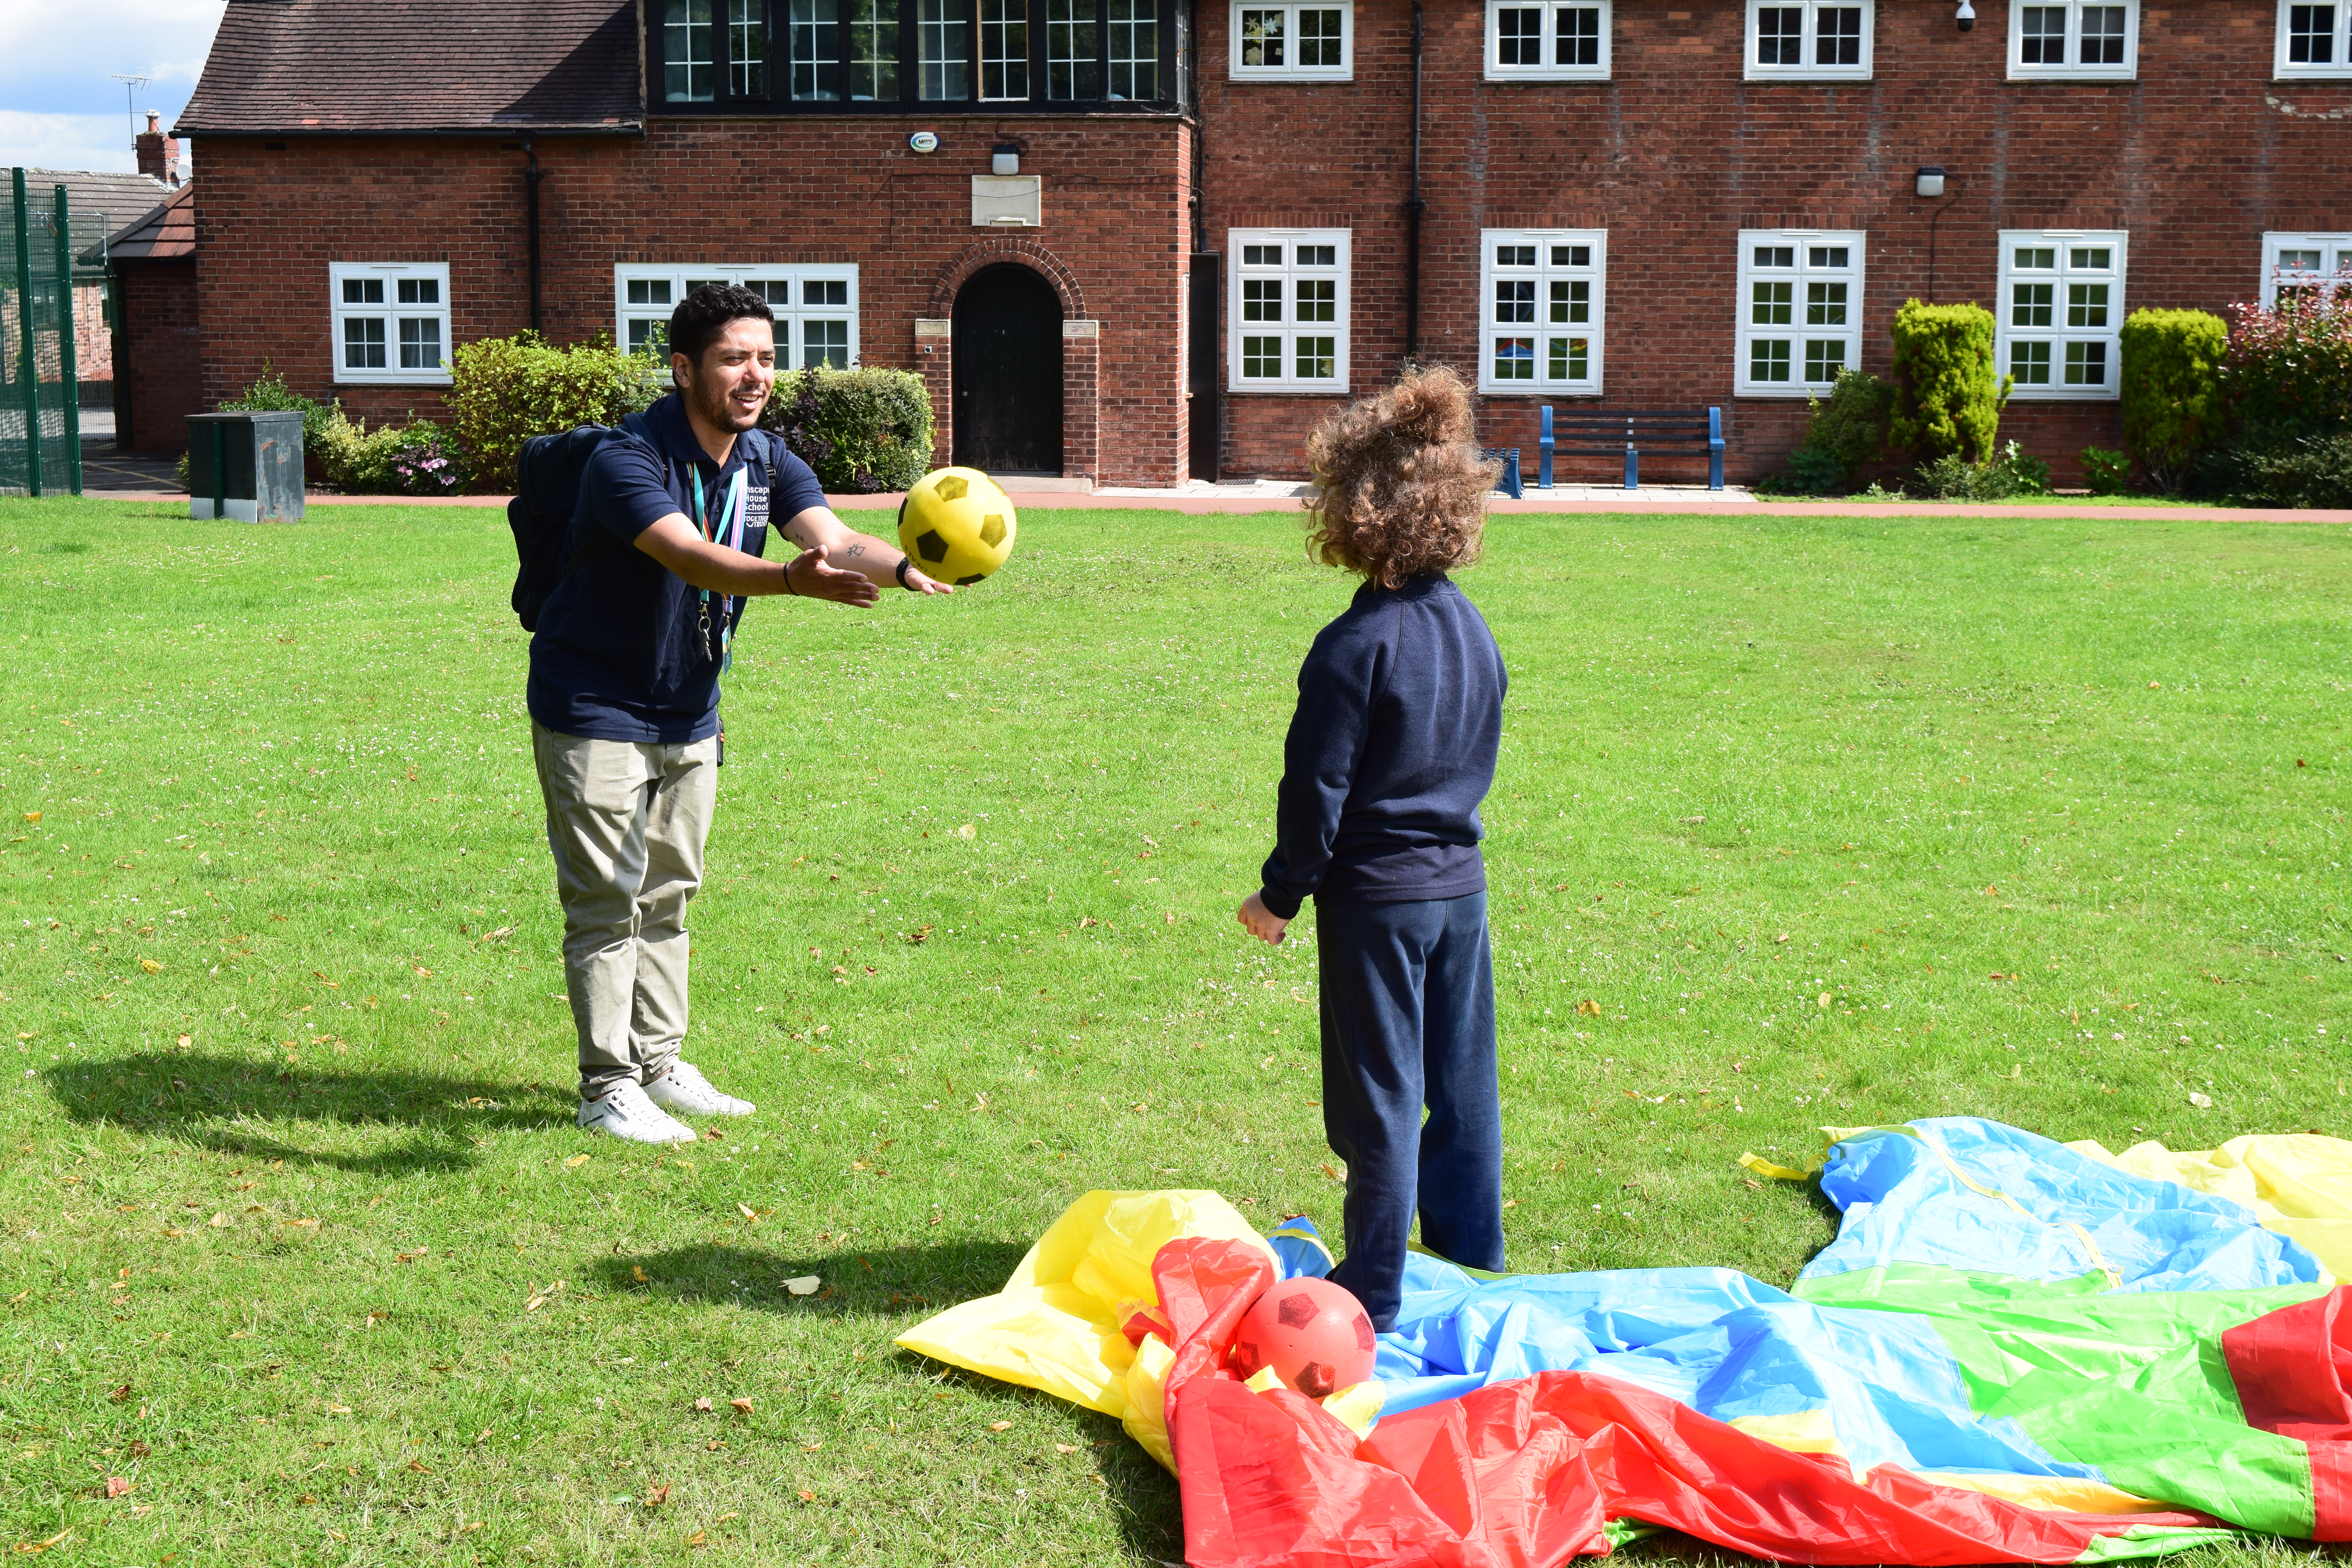 Staff member passing a ball to a student at the sports field.